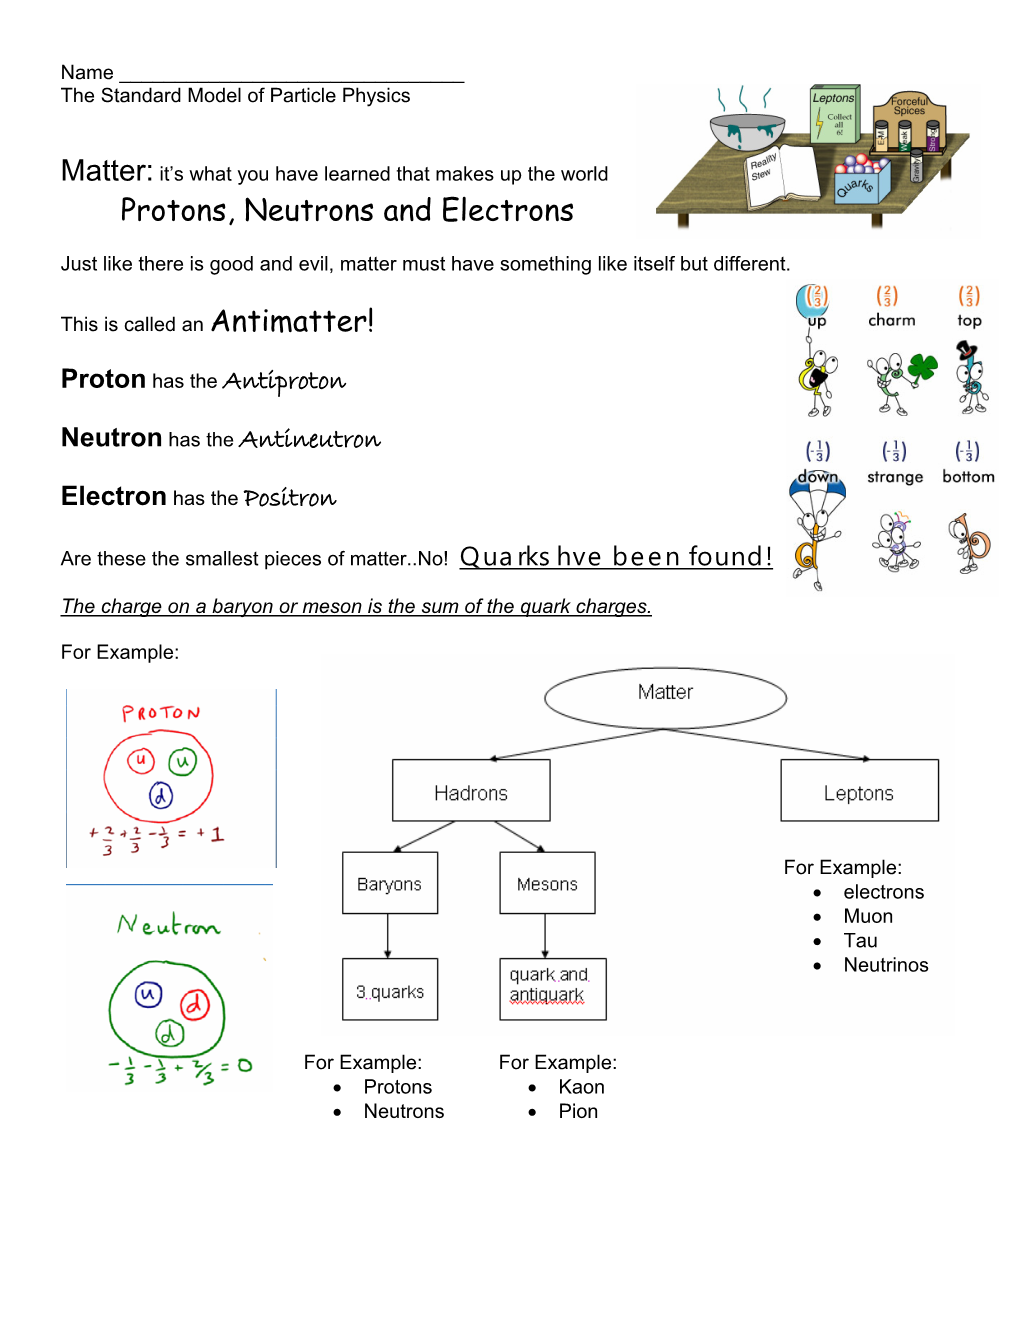 Protons, Neutrons and Electrons